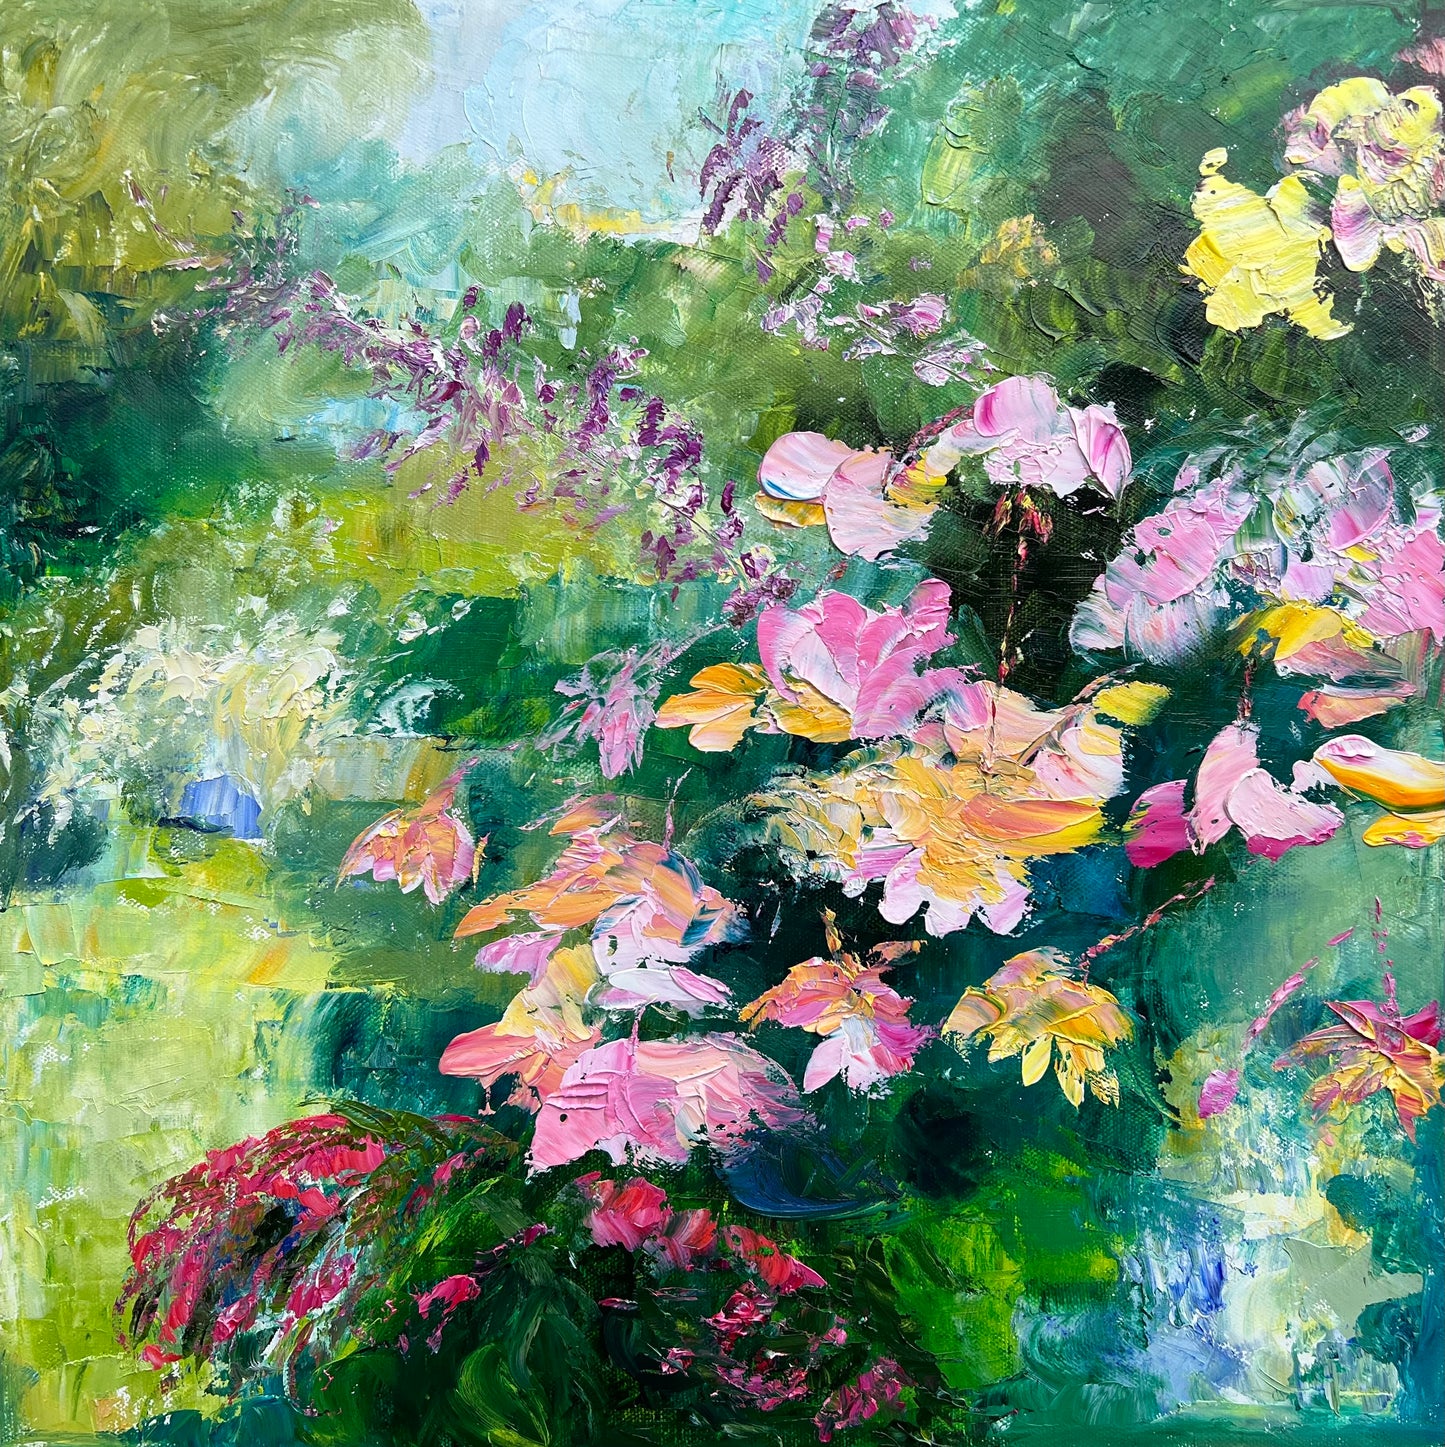 abstract impressionist painting of some pink flowers cascading down some leaves